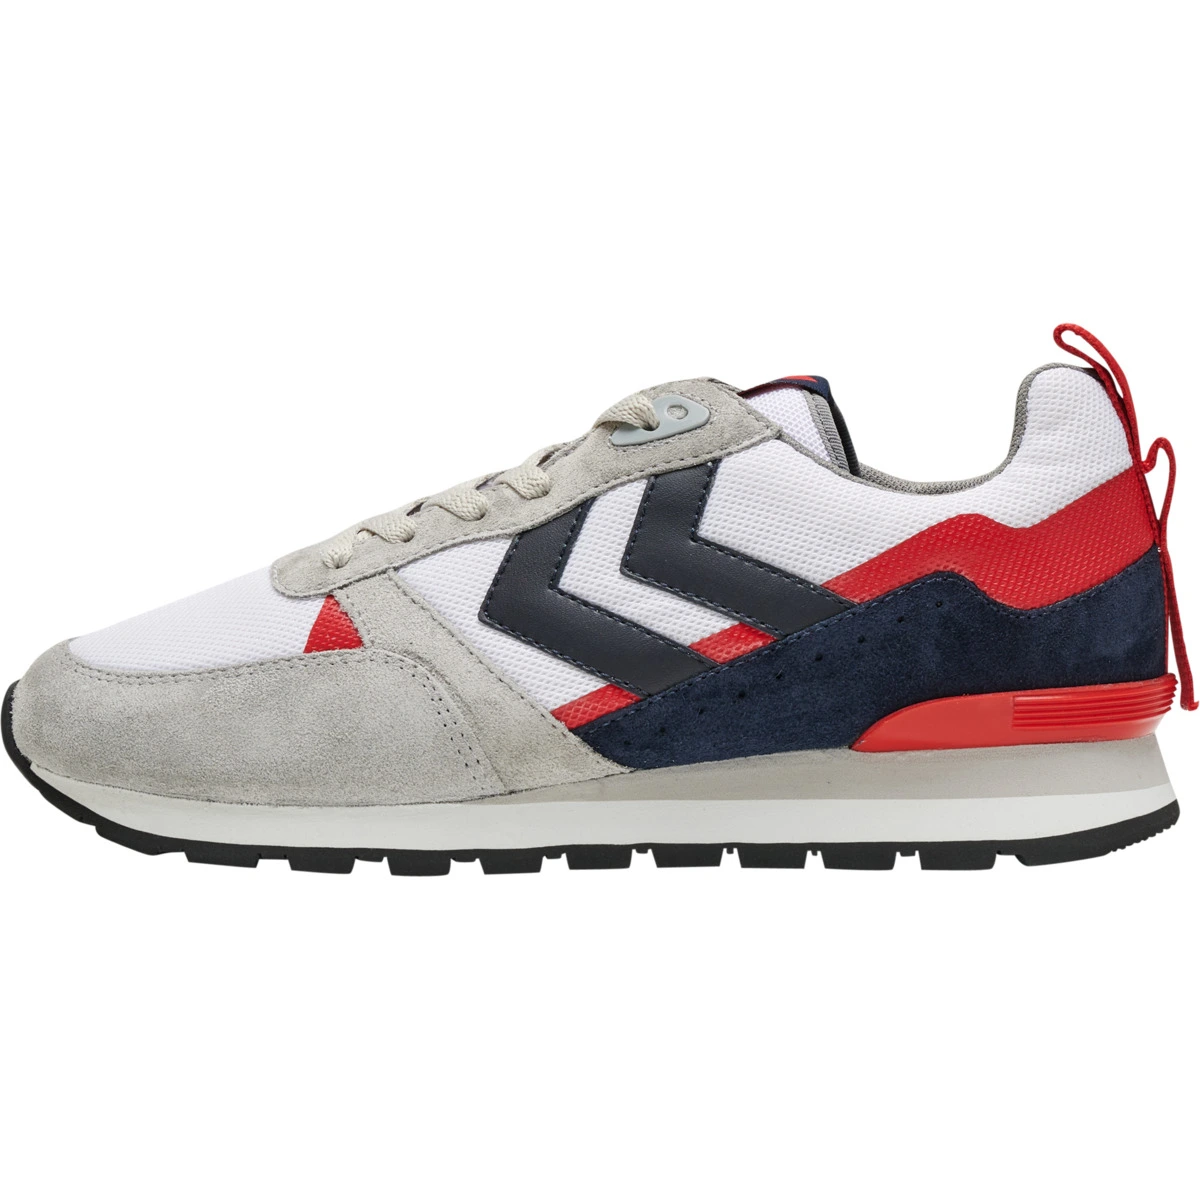 9253 WHITE/BLUE/RED